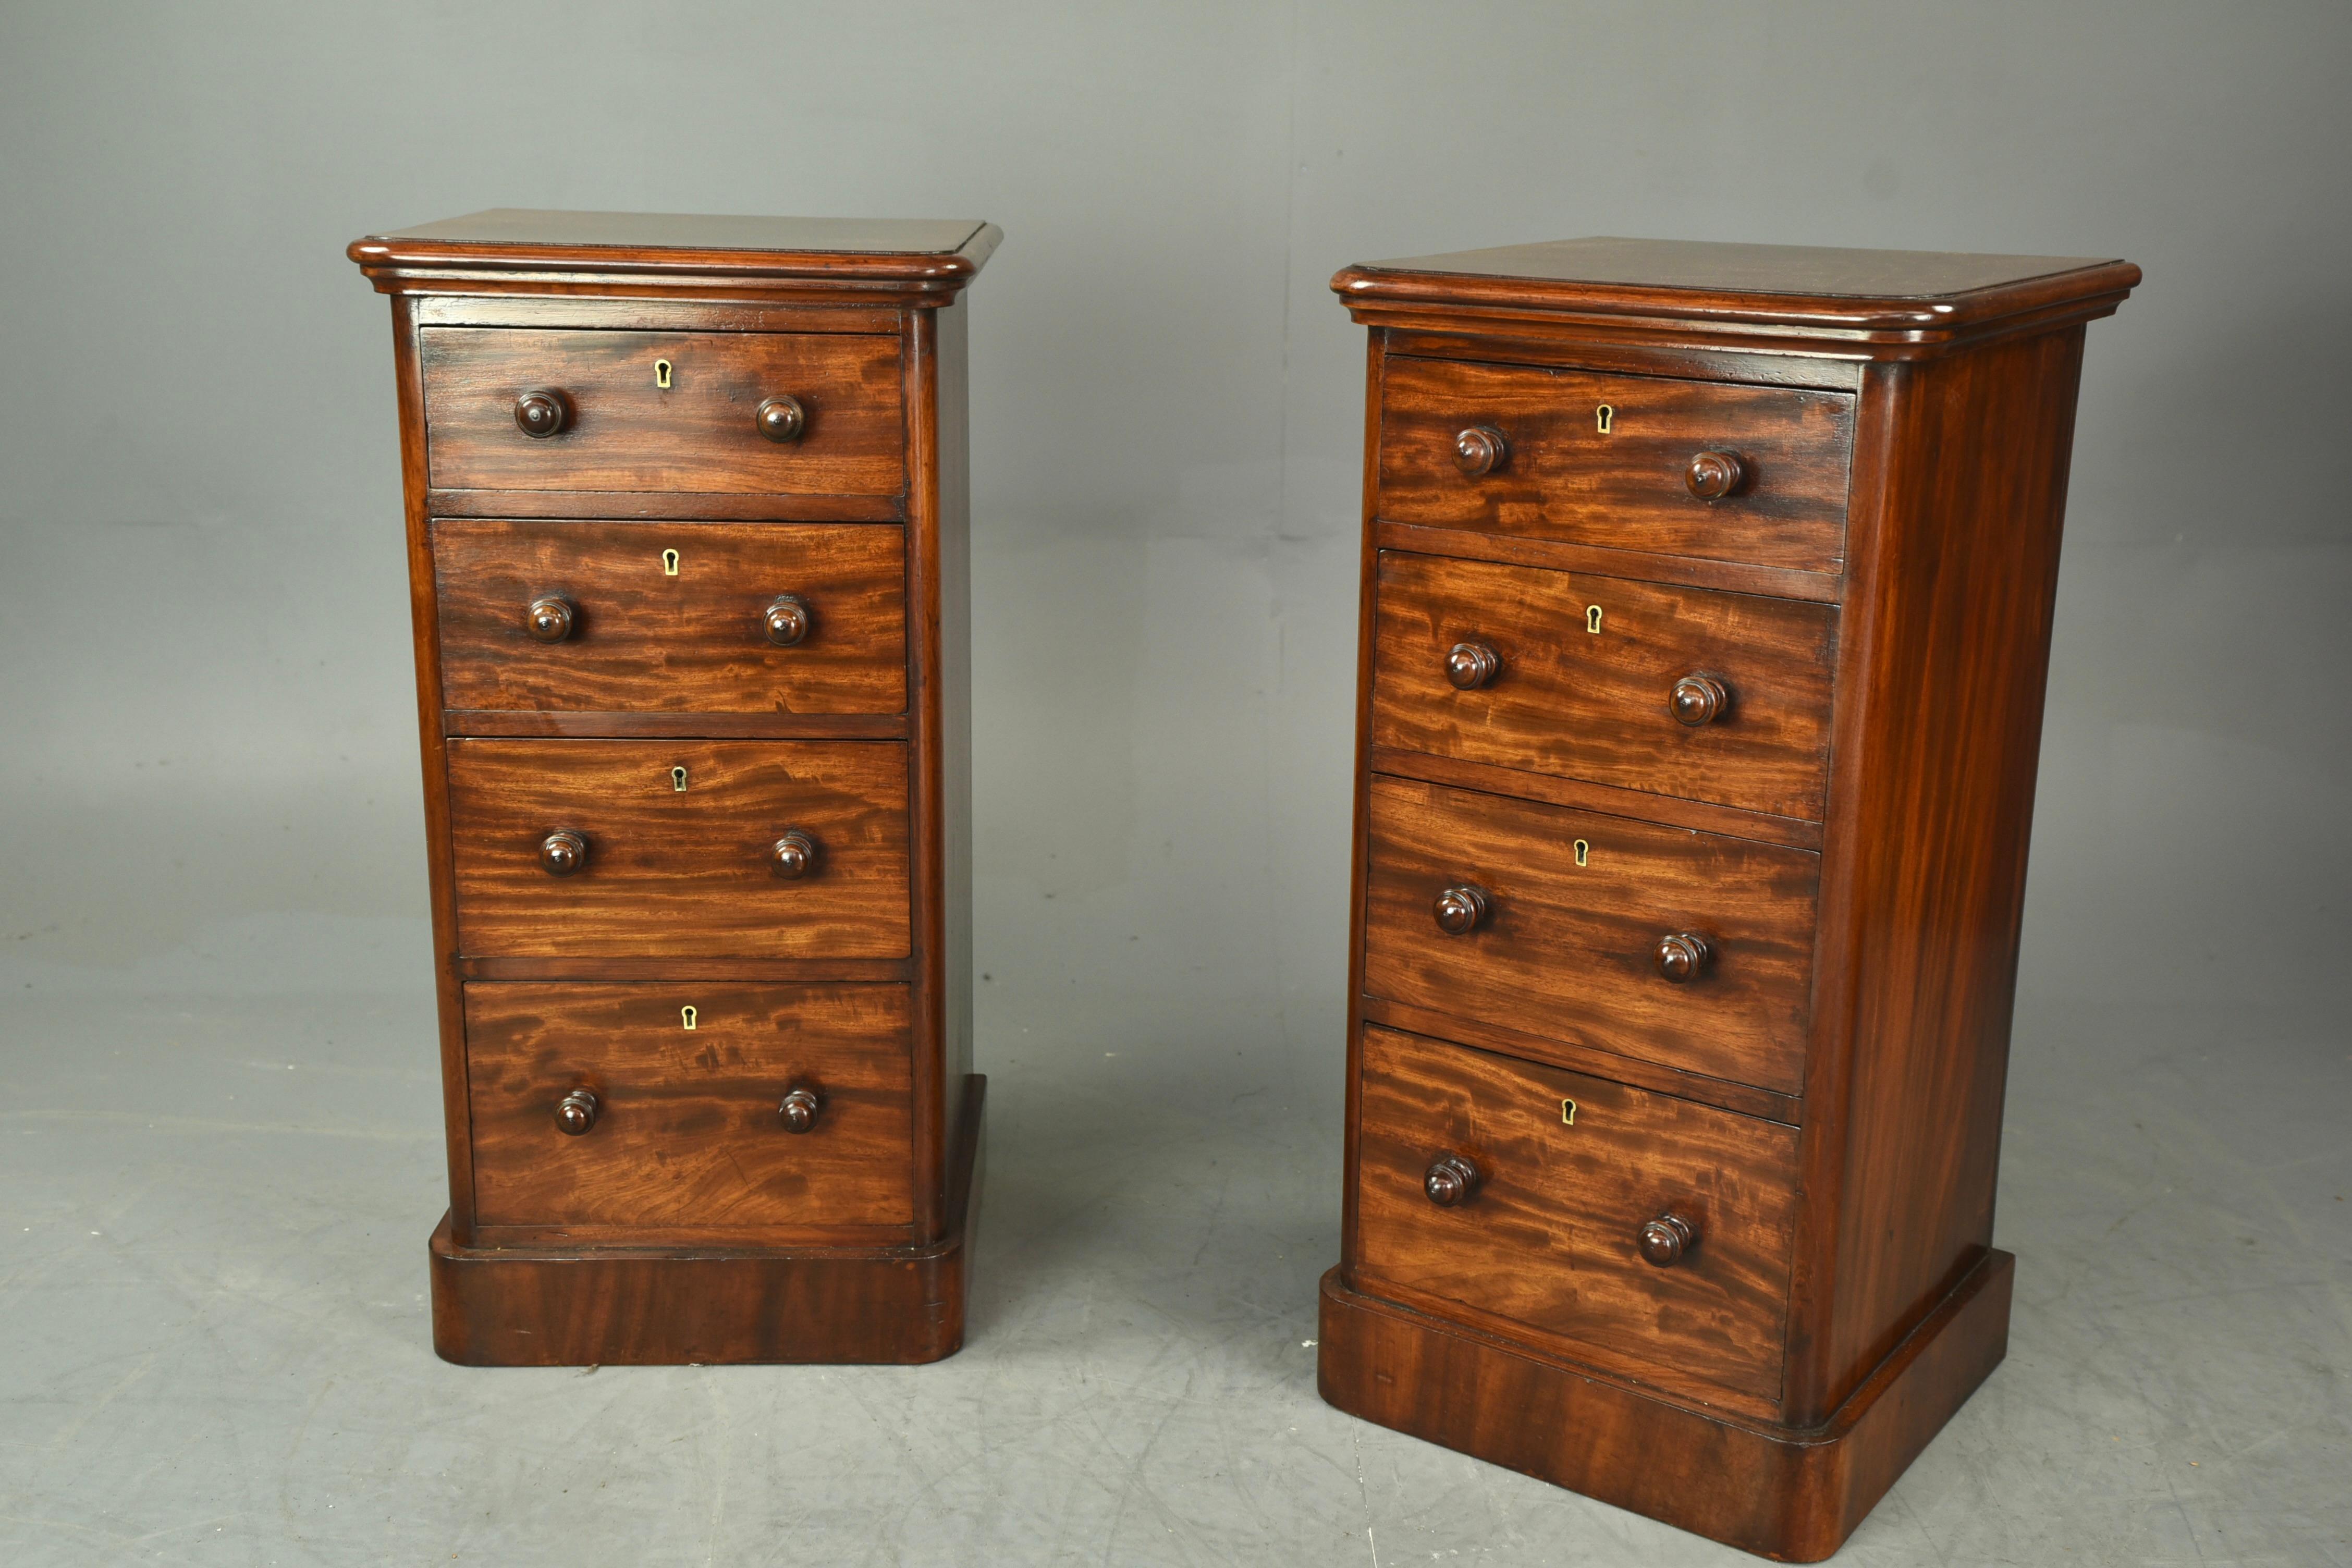 Fine quality pair of Victorian mahogany chests of drawers circa 1860.
Each chest has four graduating drawers that all slide nice and smooth with quality solid Ash linings and fine hand dovetail joints.
They have a wonderful mahogany grain and a